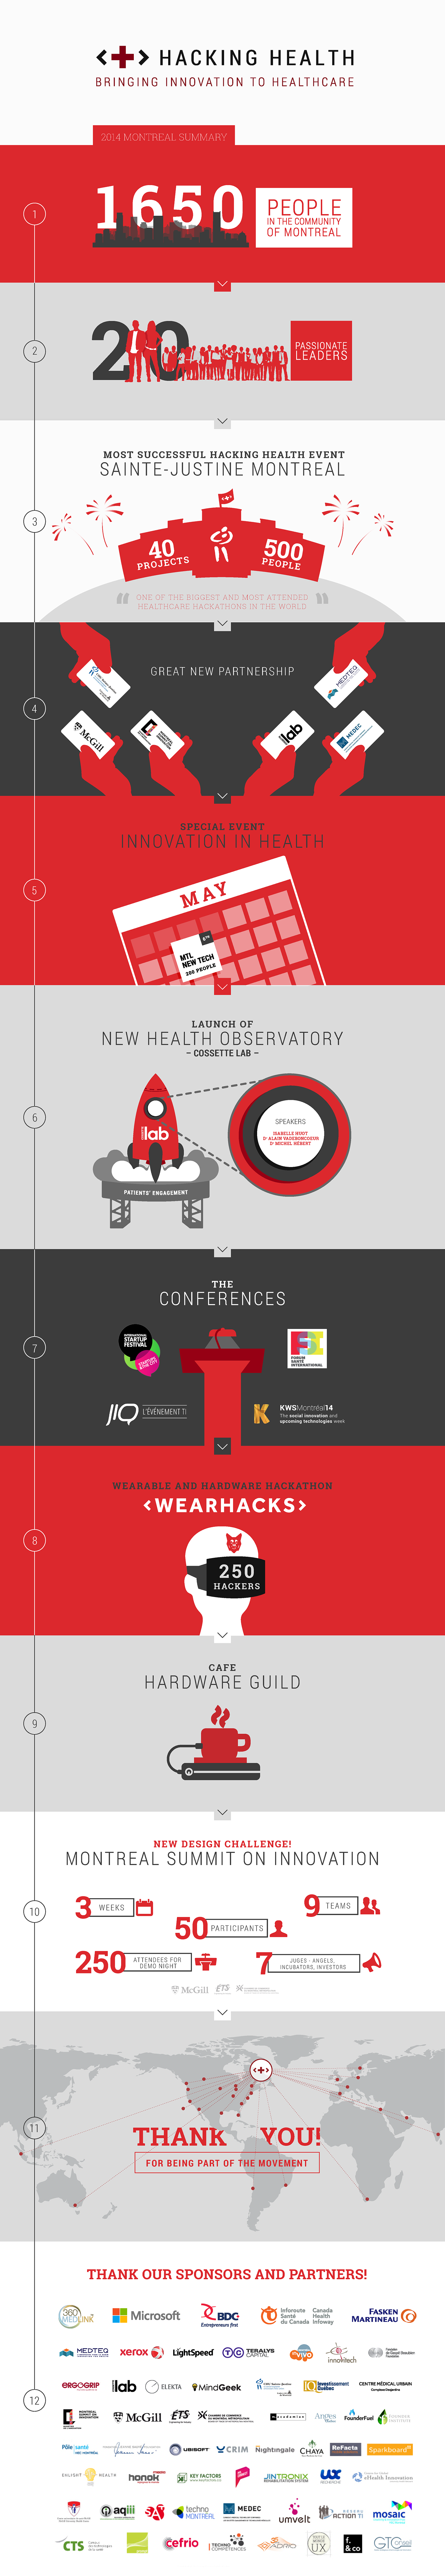 hacking Health hack Startup Event graphics summary